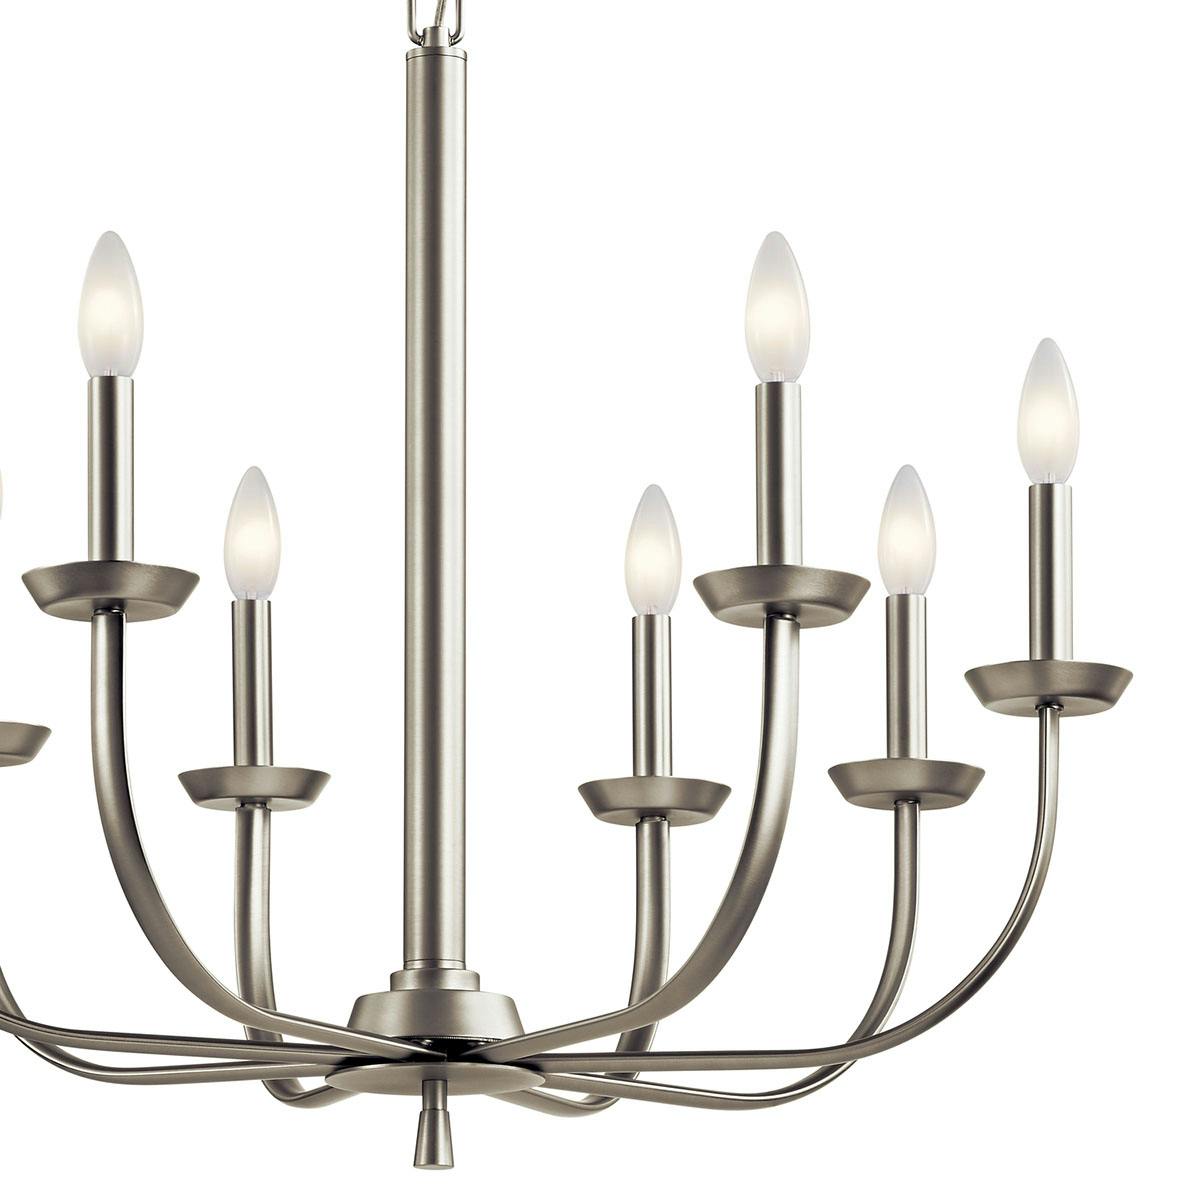 Close up view of the Kennewick 8 Light Chandelier Nickel on a white background